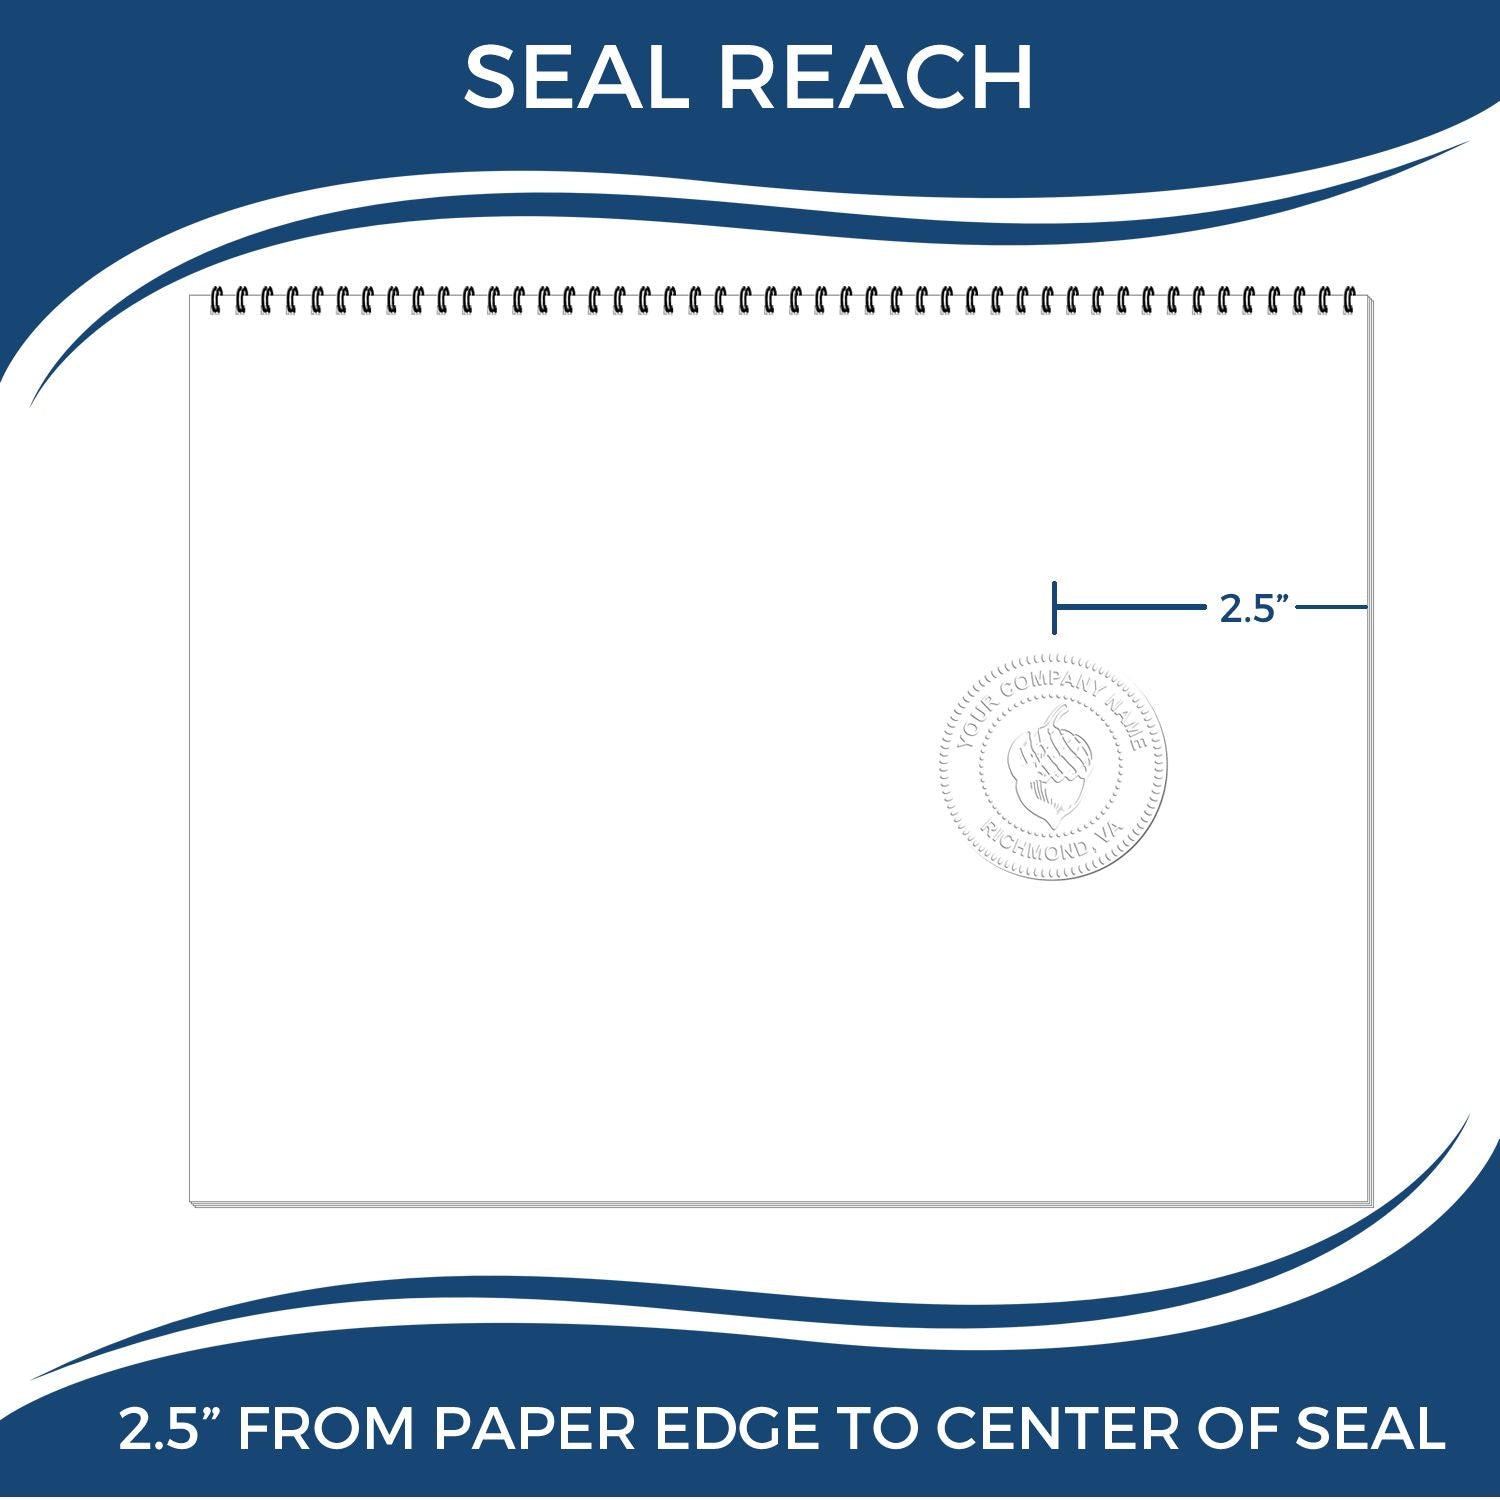 An infographic showing the seal reach which is represented by a ruler and a miniature seal image of the Heavy Duty Cast Iron Idaho Architect Embosser